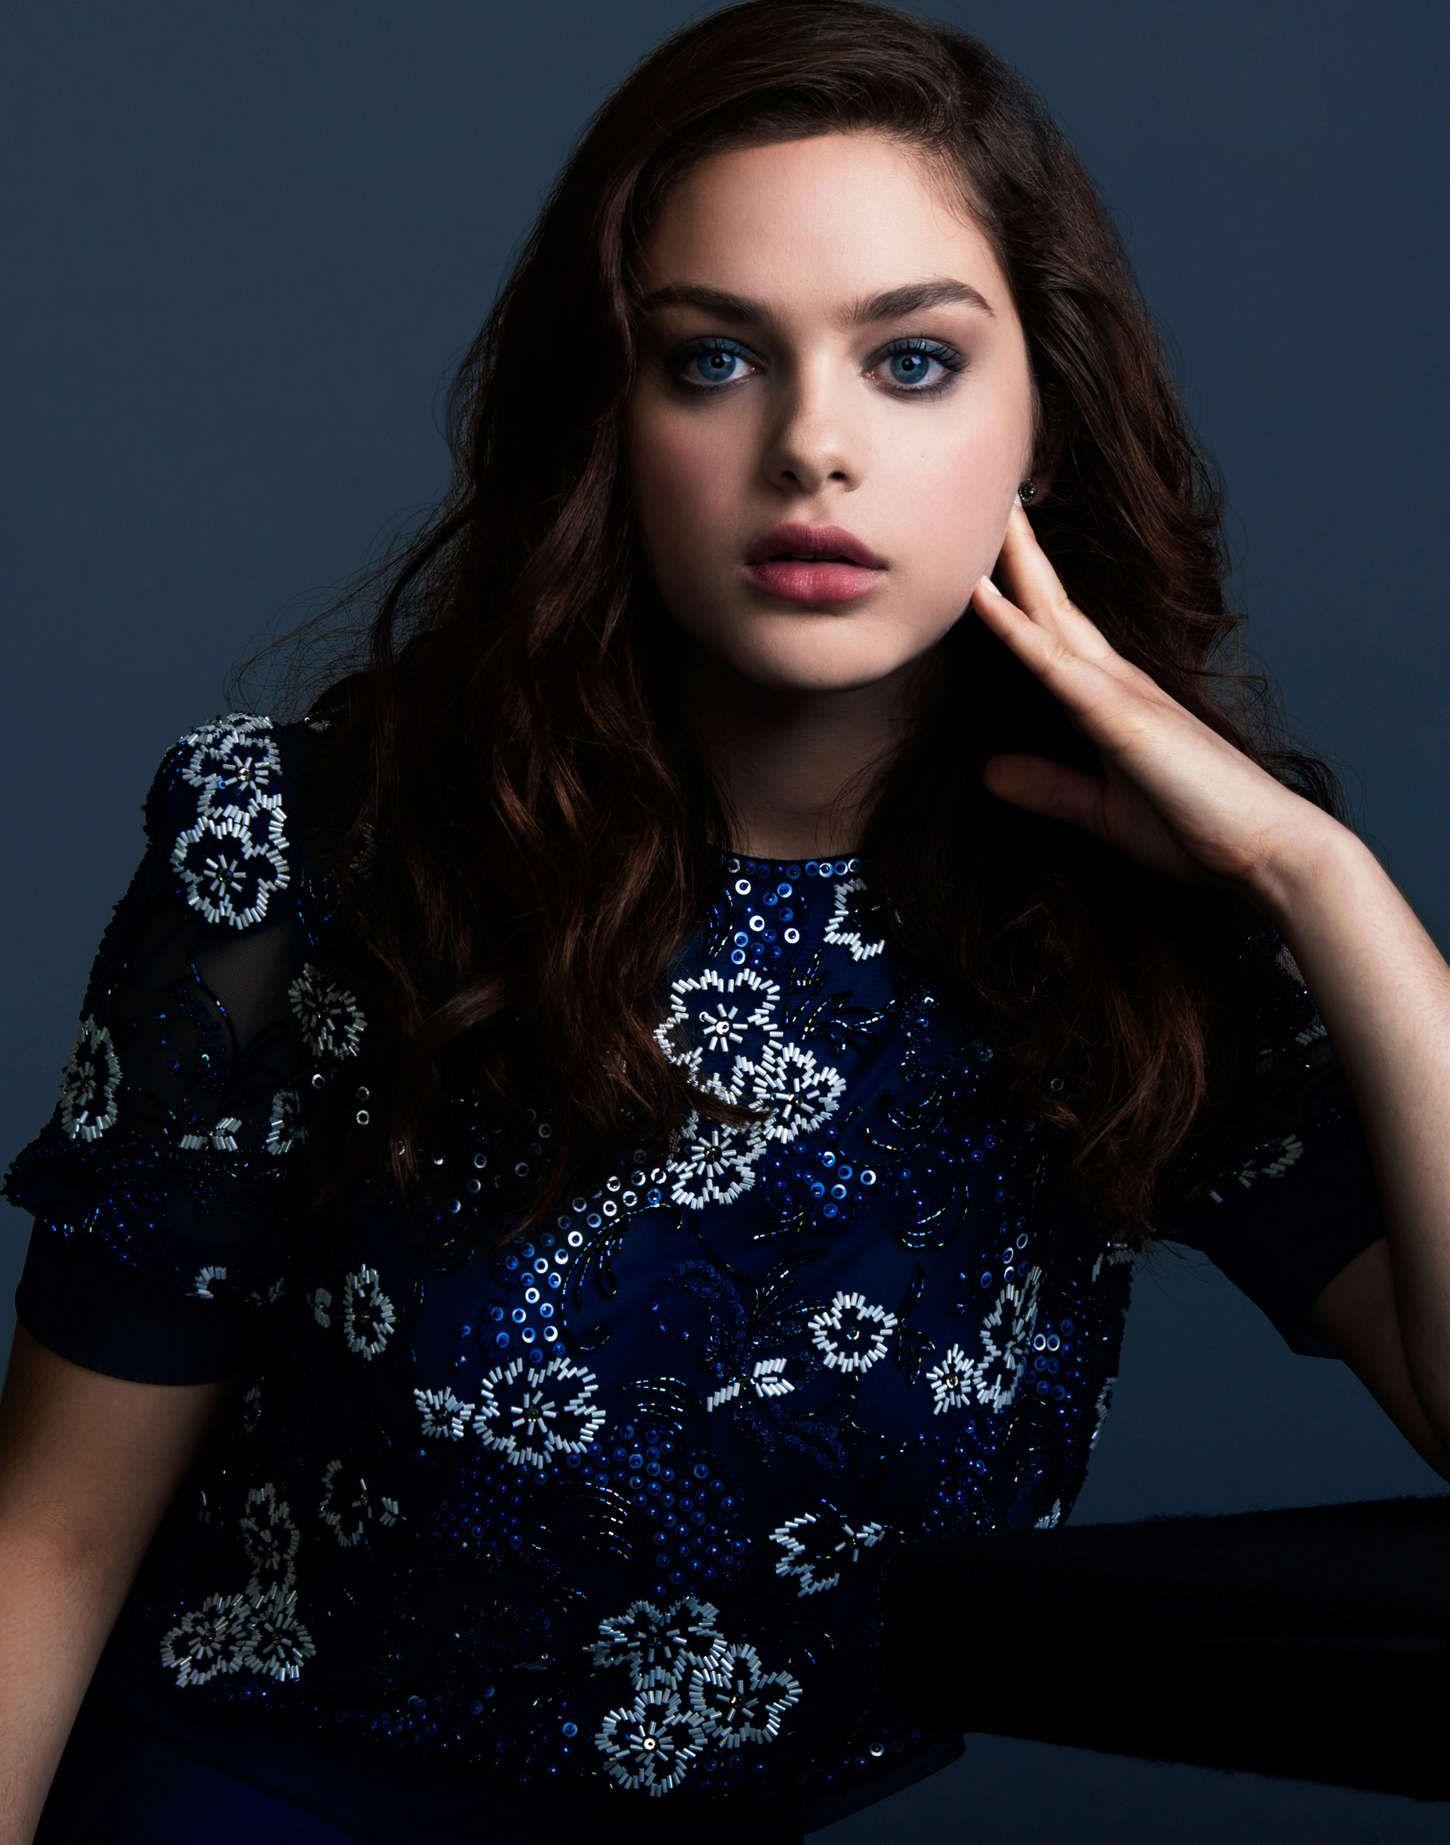 Odeya Rush Wallpapers High Resolution and Quality Download.